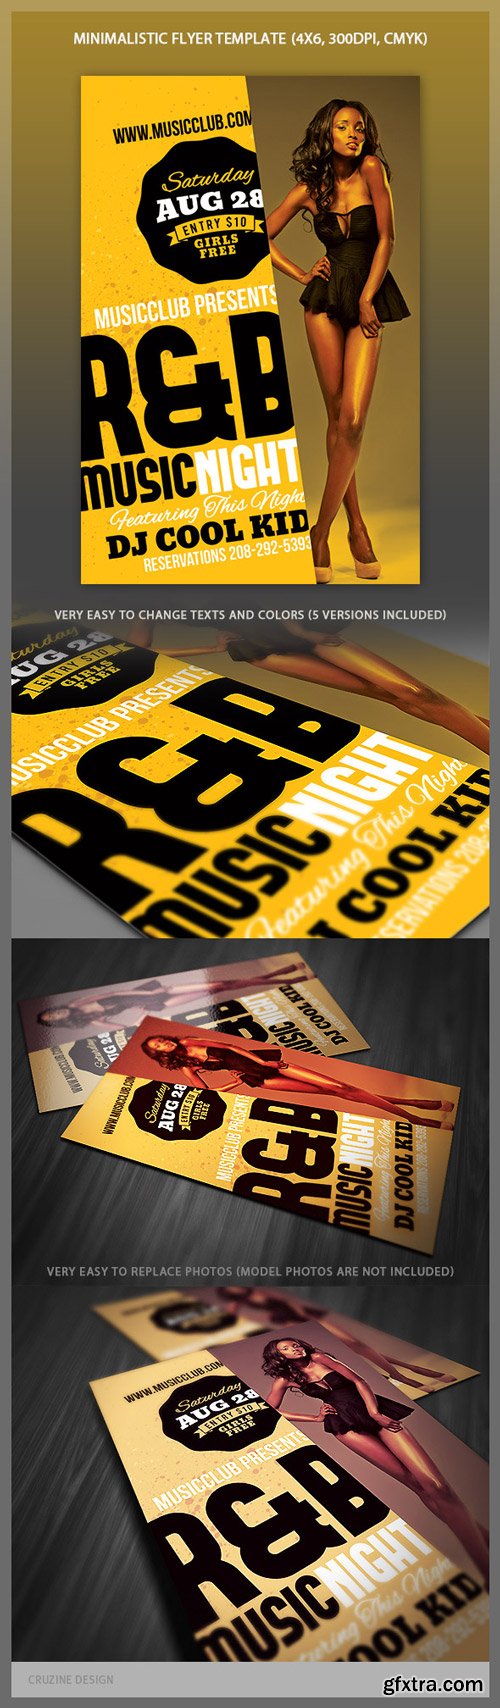 GraphicRiver - Minimalistic Party Flyer 2 - 4558938